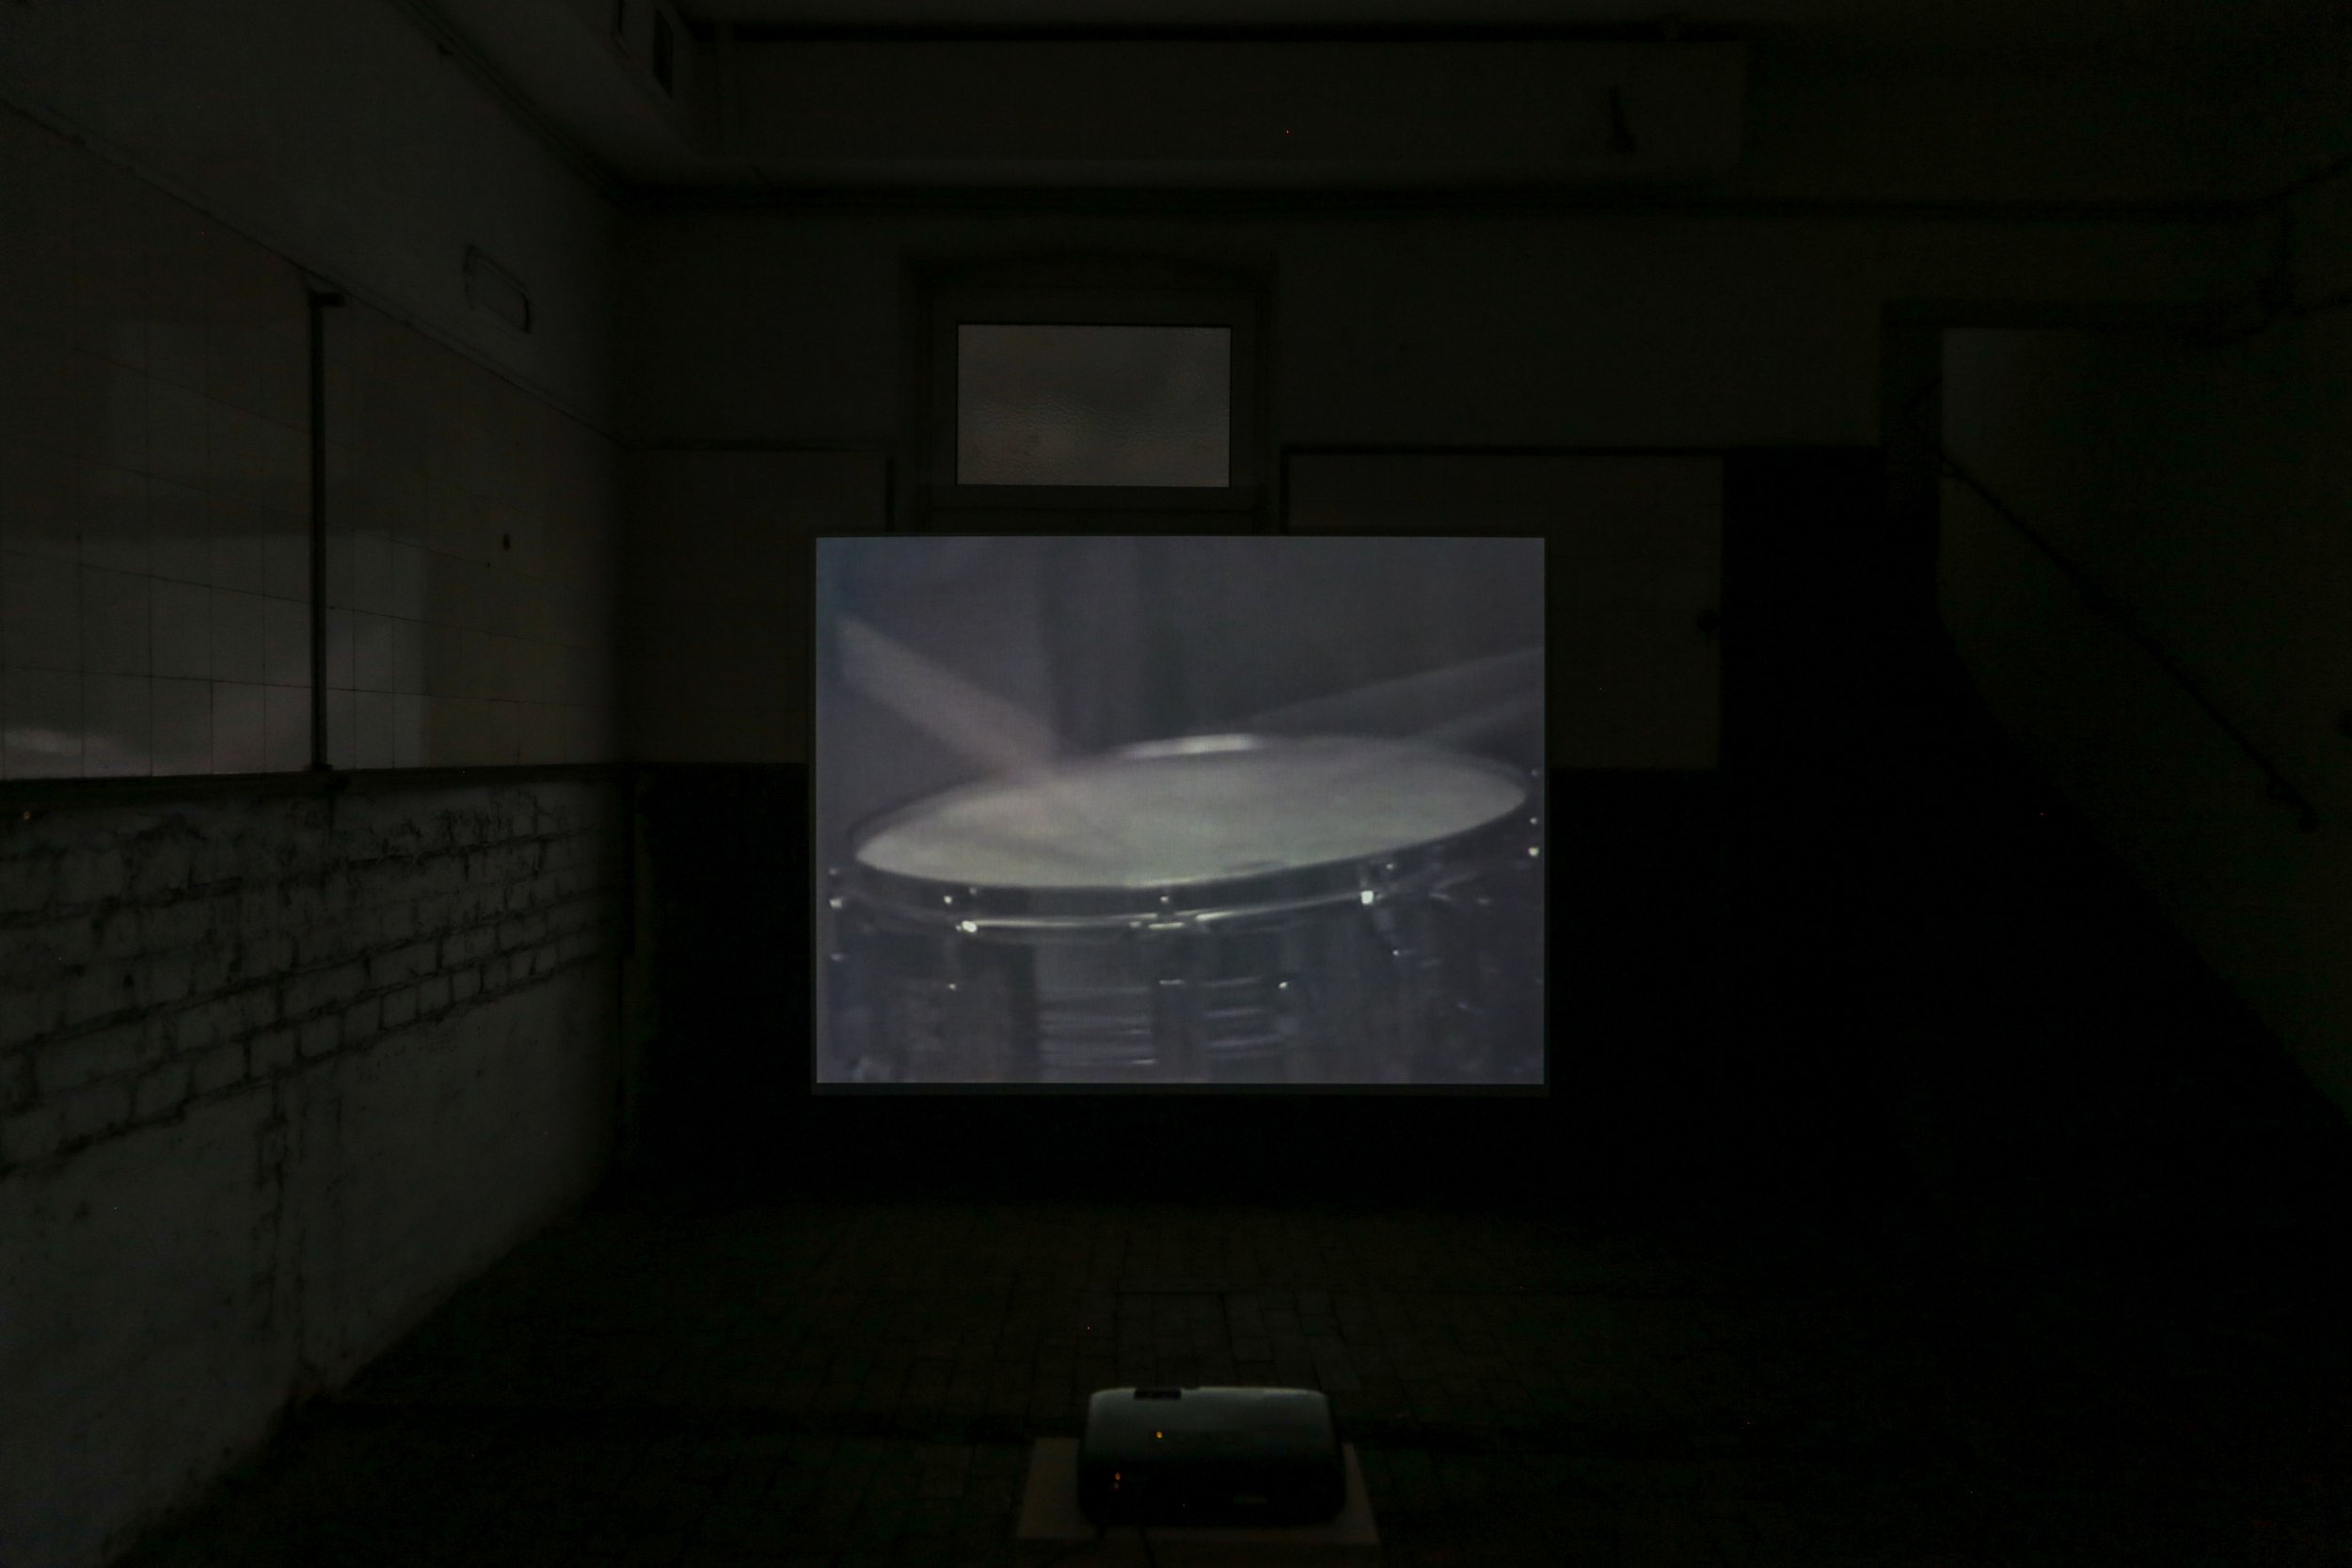   fig11 installation view Toine Horvers, Rolling, 1986 , 00:15:53., In collections: De Appel, LIMA  